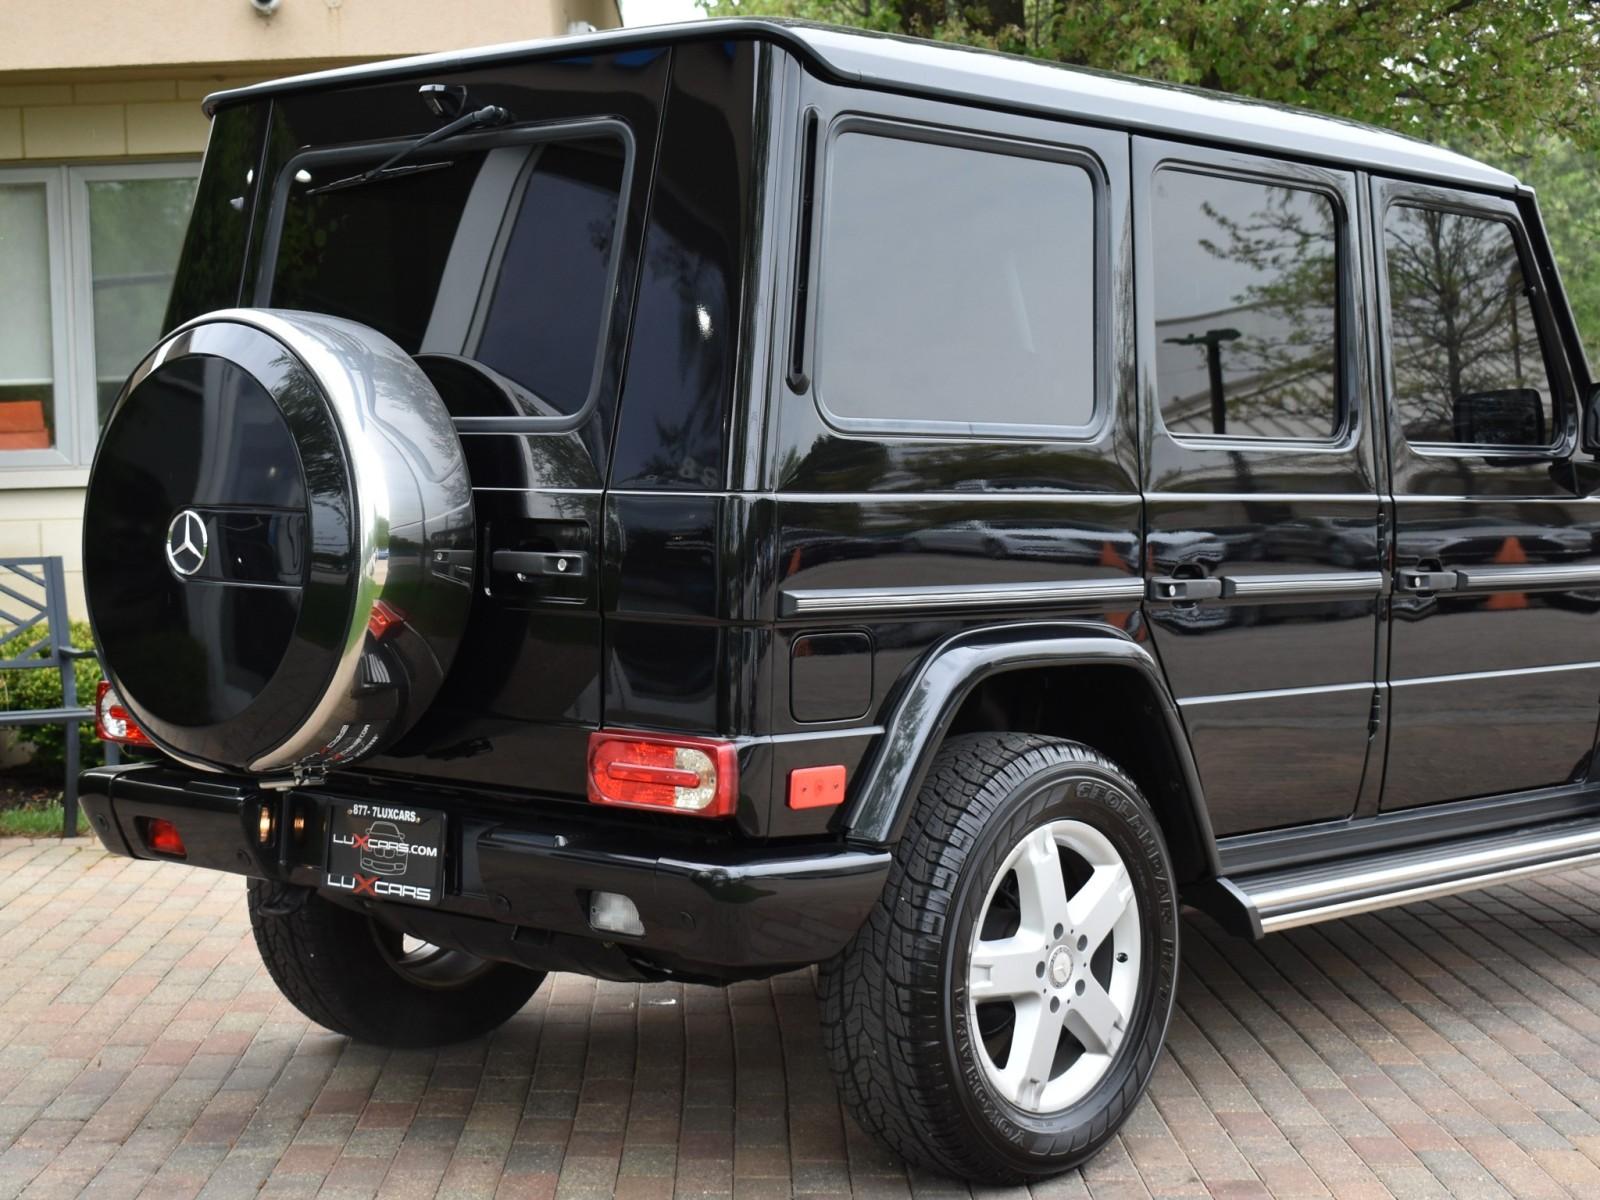 Used 2008 Mercedes-Benz G-Class Navi Leather Power Sunroof 4x4 Heated Seats  Rear View Camera Serviced Clean For Sale (Sold)